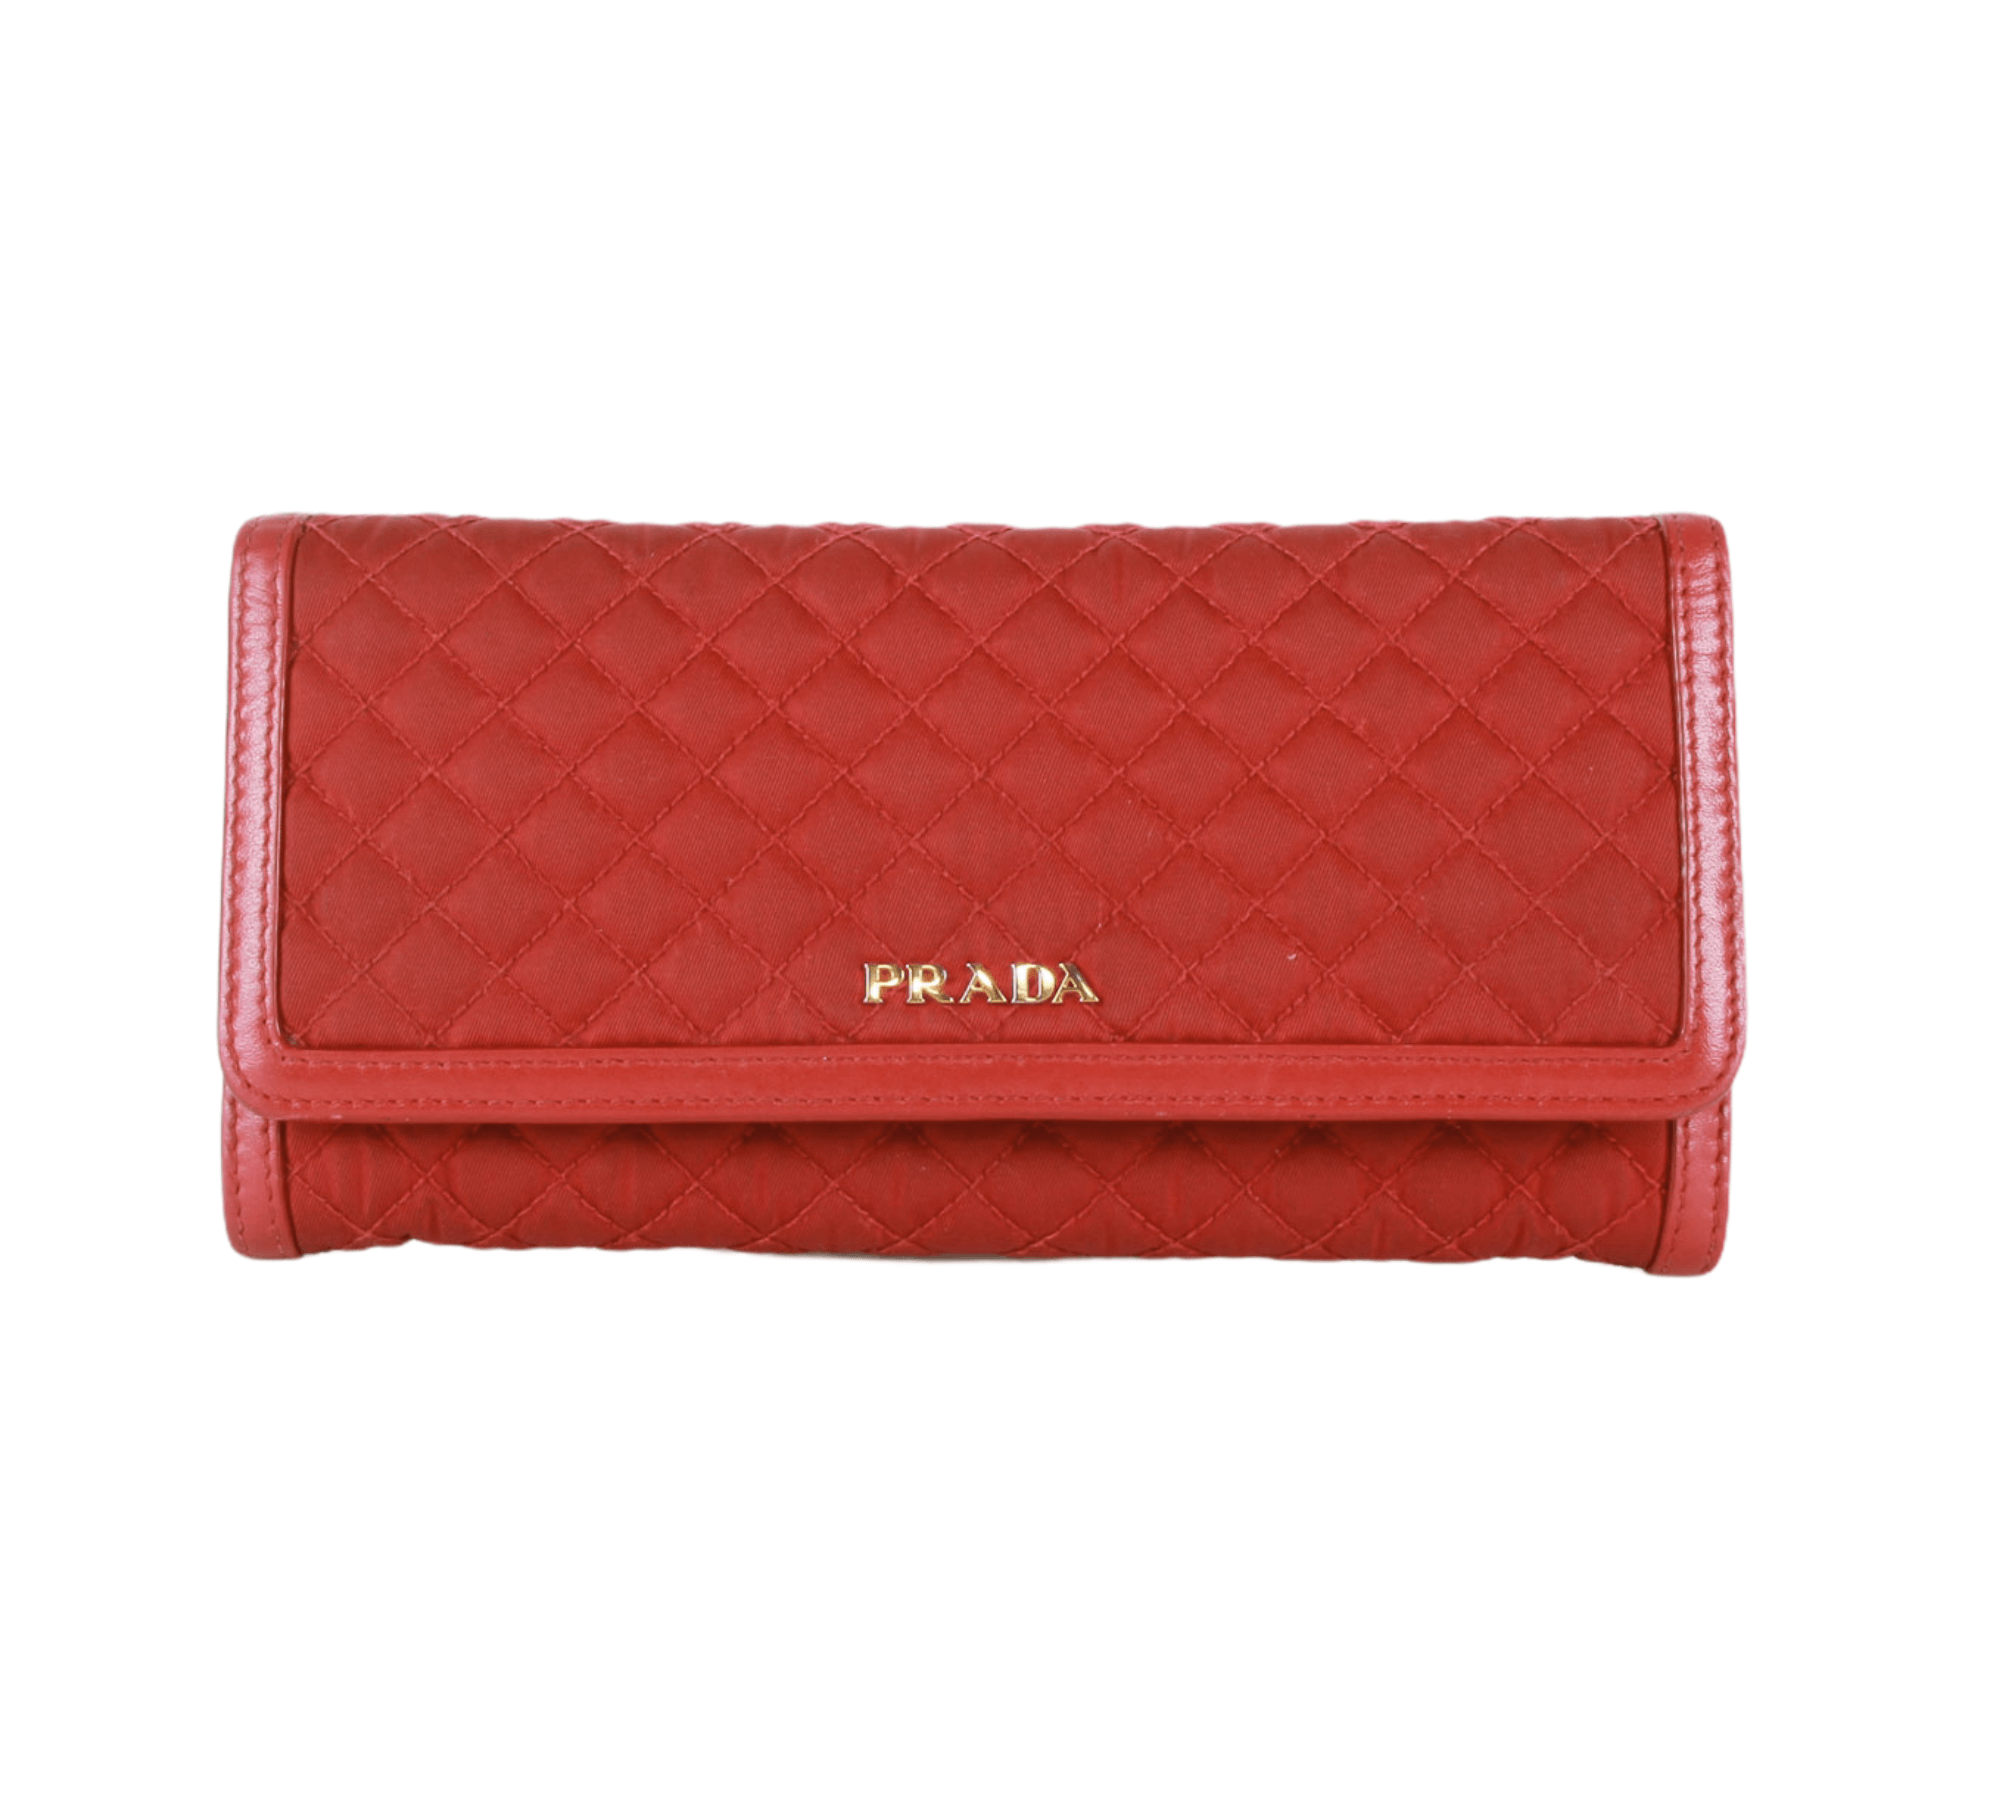 PRADA-Leather-Shoulder-Bag-Purse-FUOCO-Red-1NF674 – dct-ep_vintage luxury  Store